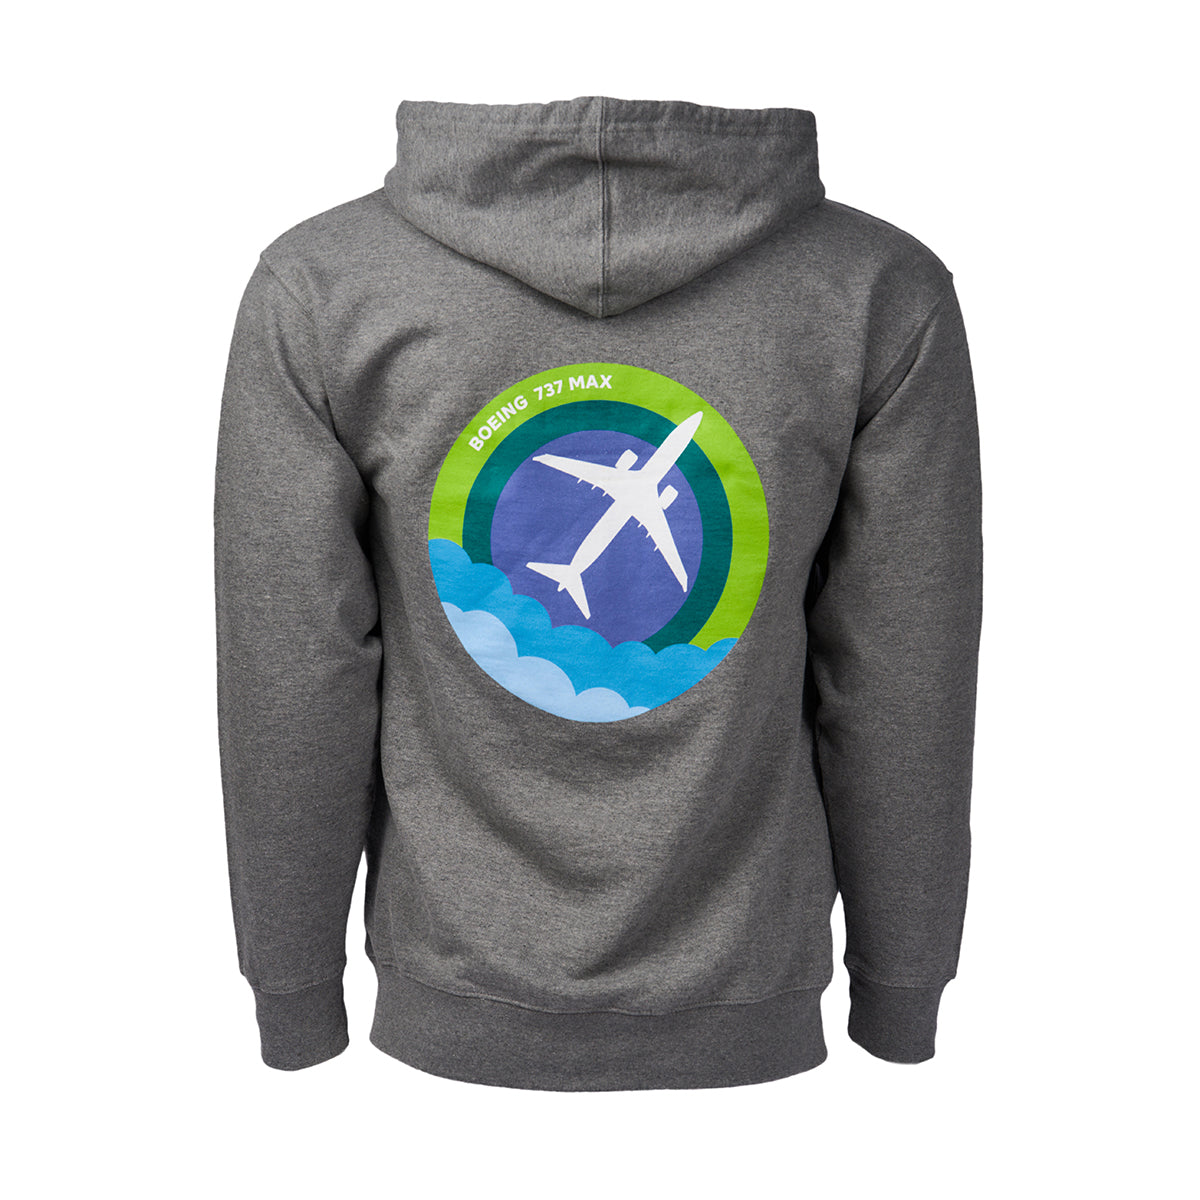 Full product image of the back side of the hooded sweatshirt in a grey color.  Showing the Skyward graphic of the Boeing 737 MAX.